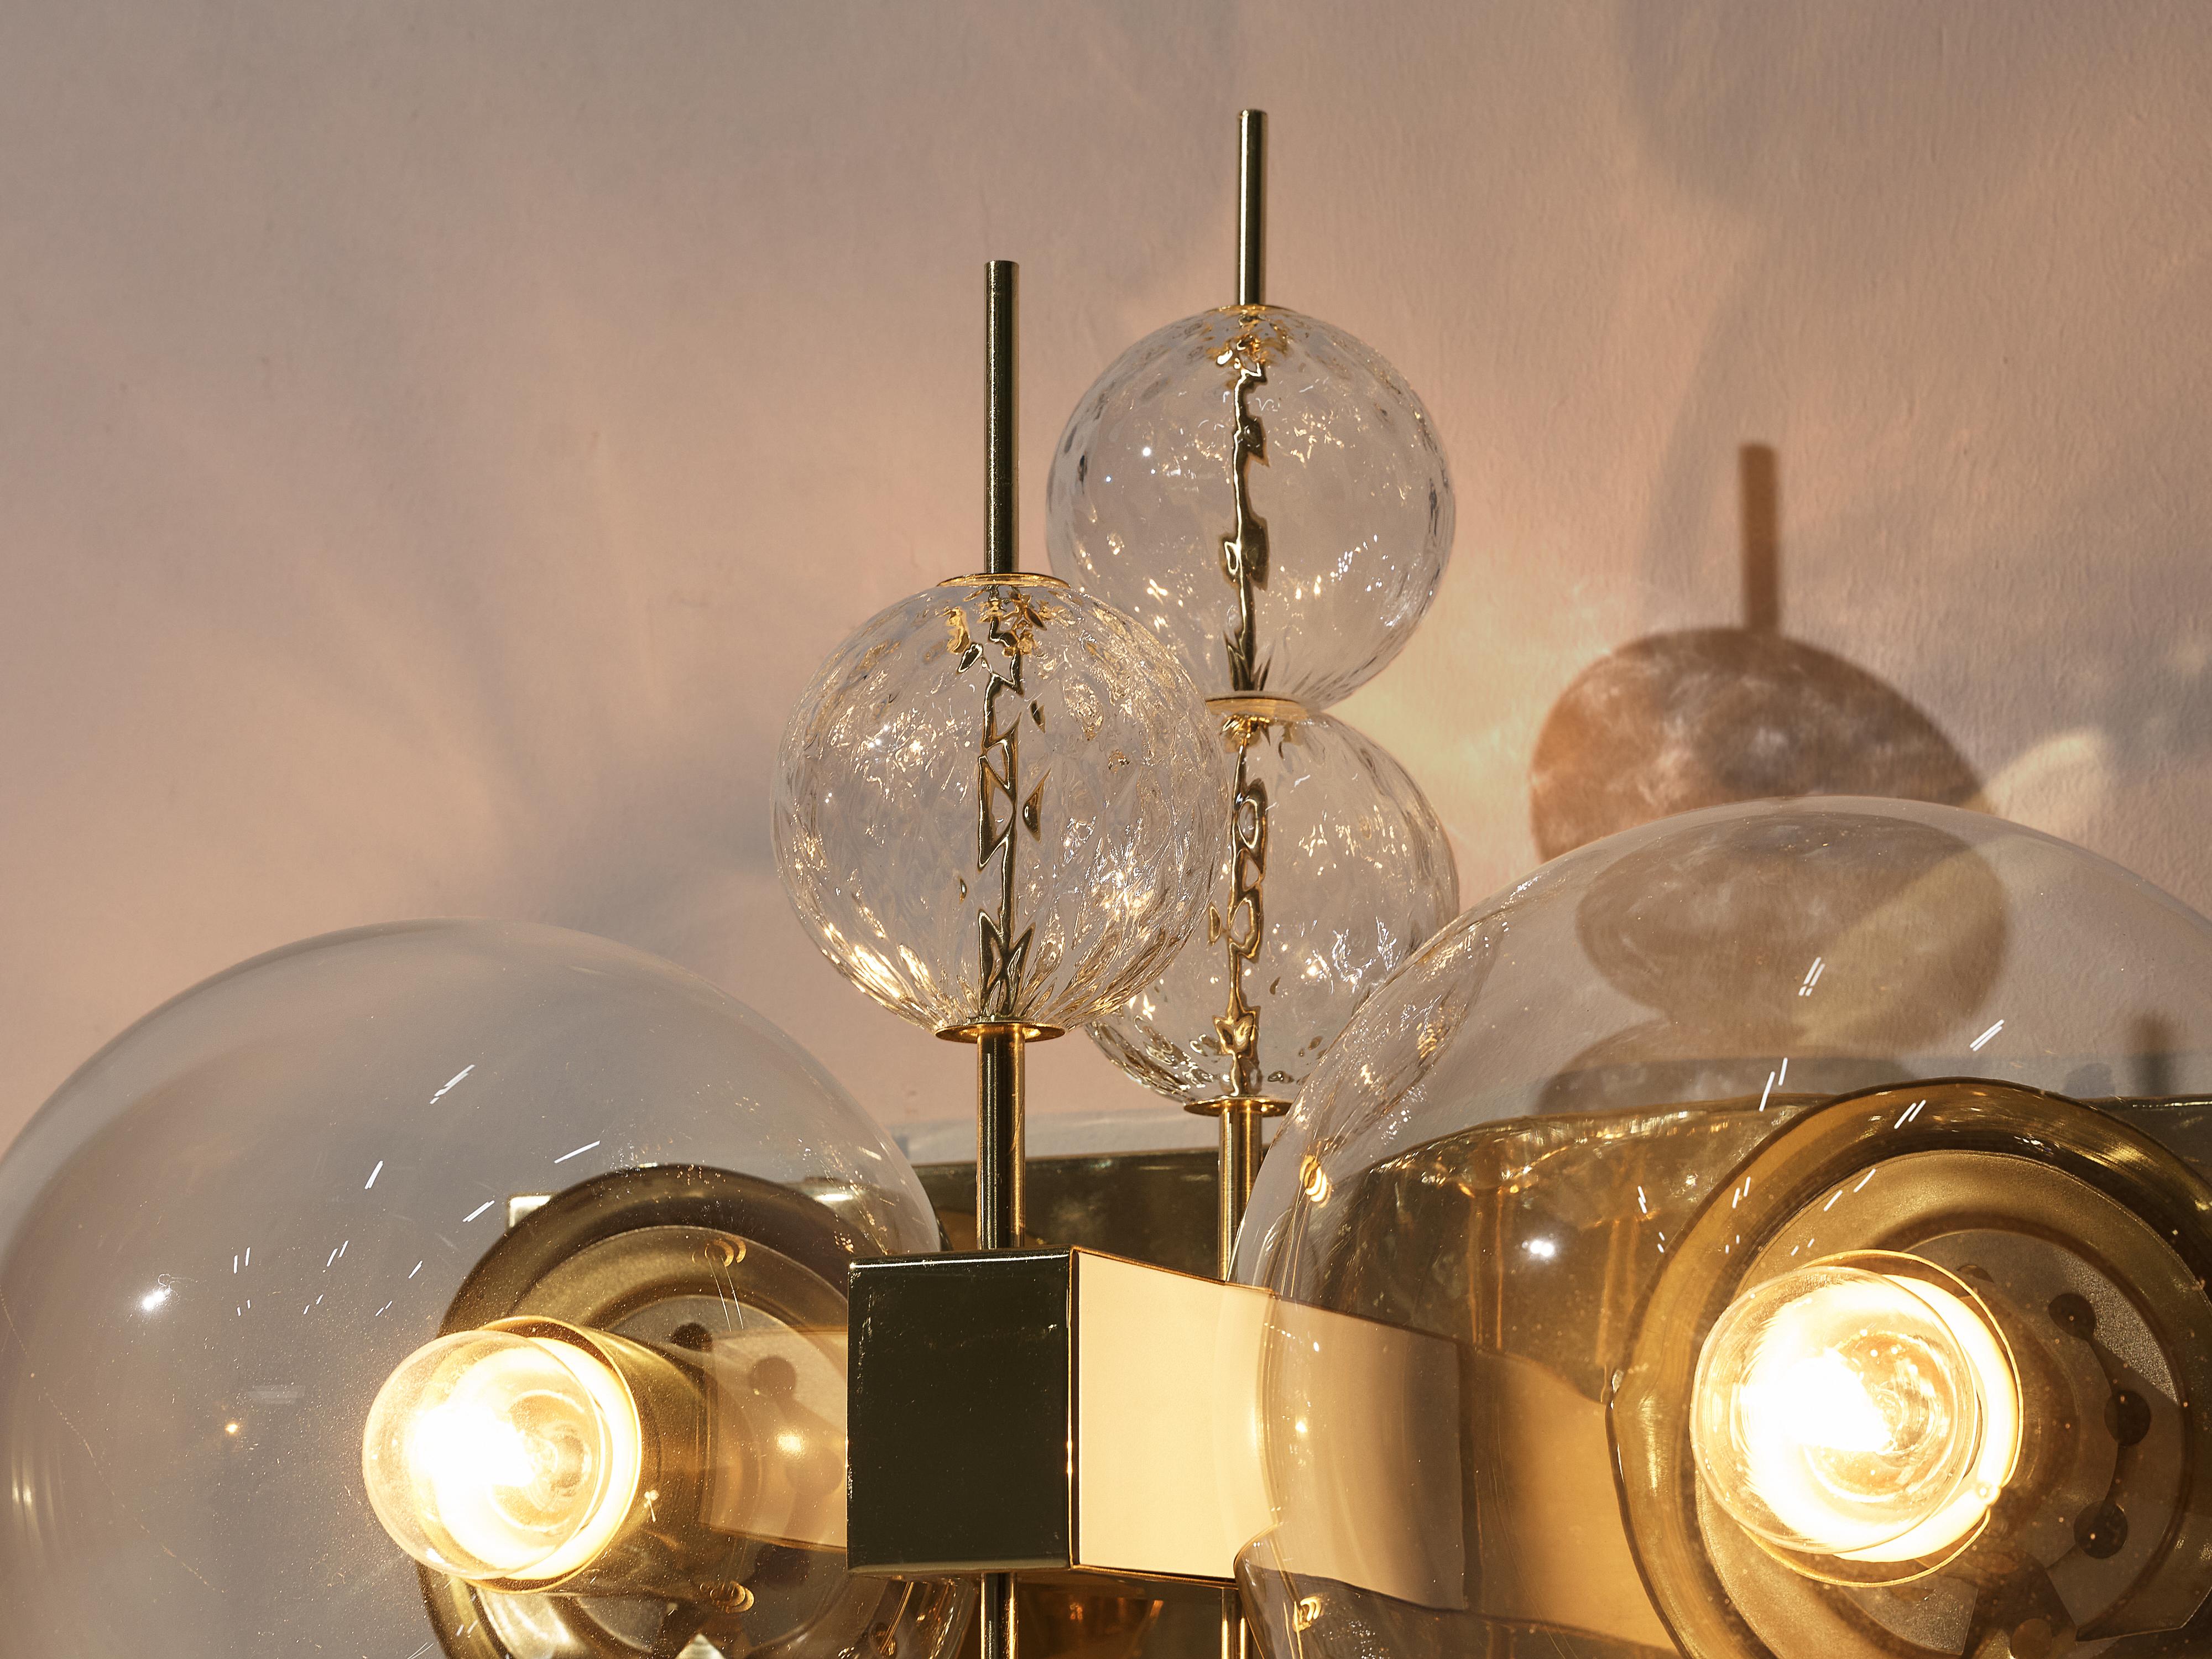 Wall lights, glass and brass, Europe, 1970s.

Captivating wall lights adorned with intricate brass details and delicate glass elements. Two light points gracefully emerge, casting a soft glow that dances through the structured glass globes. Each